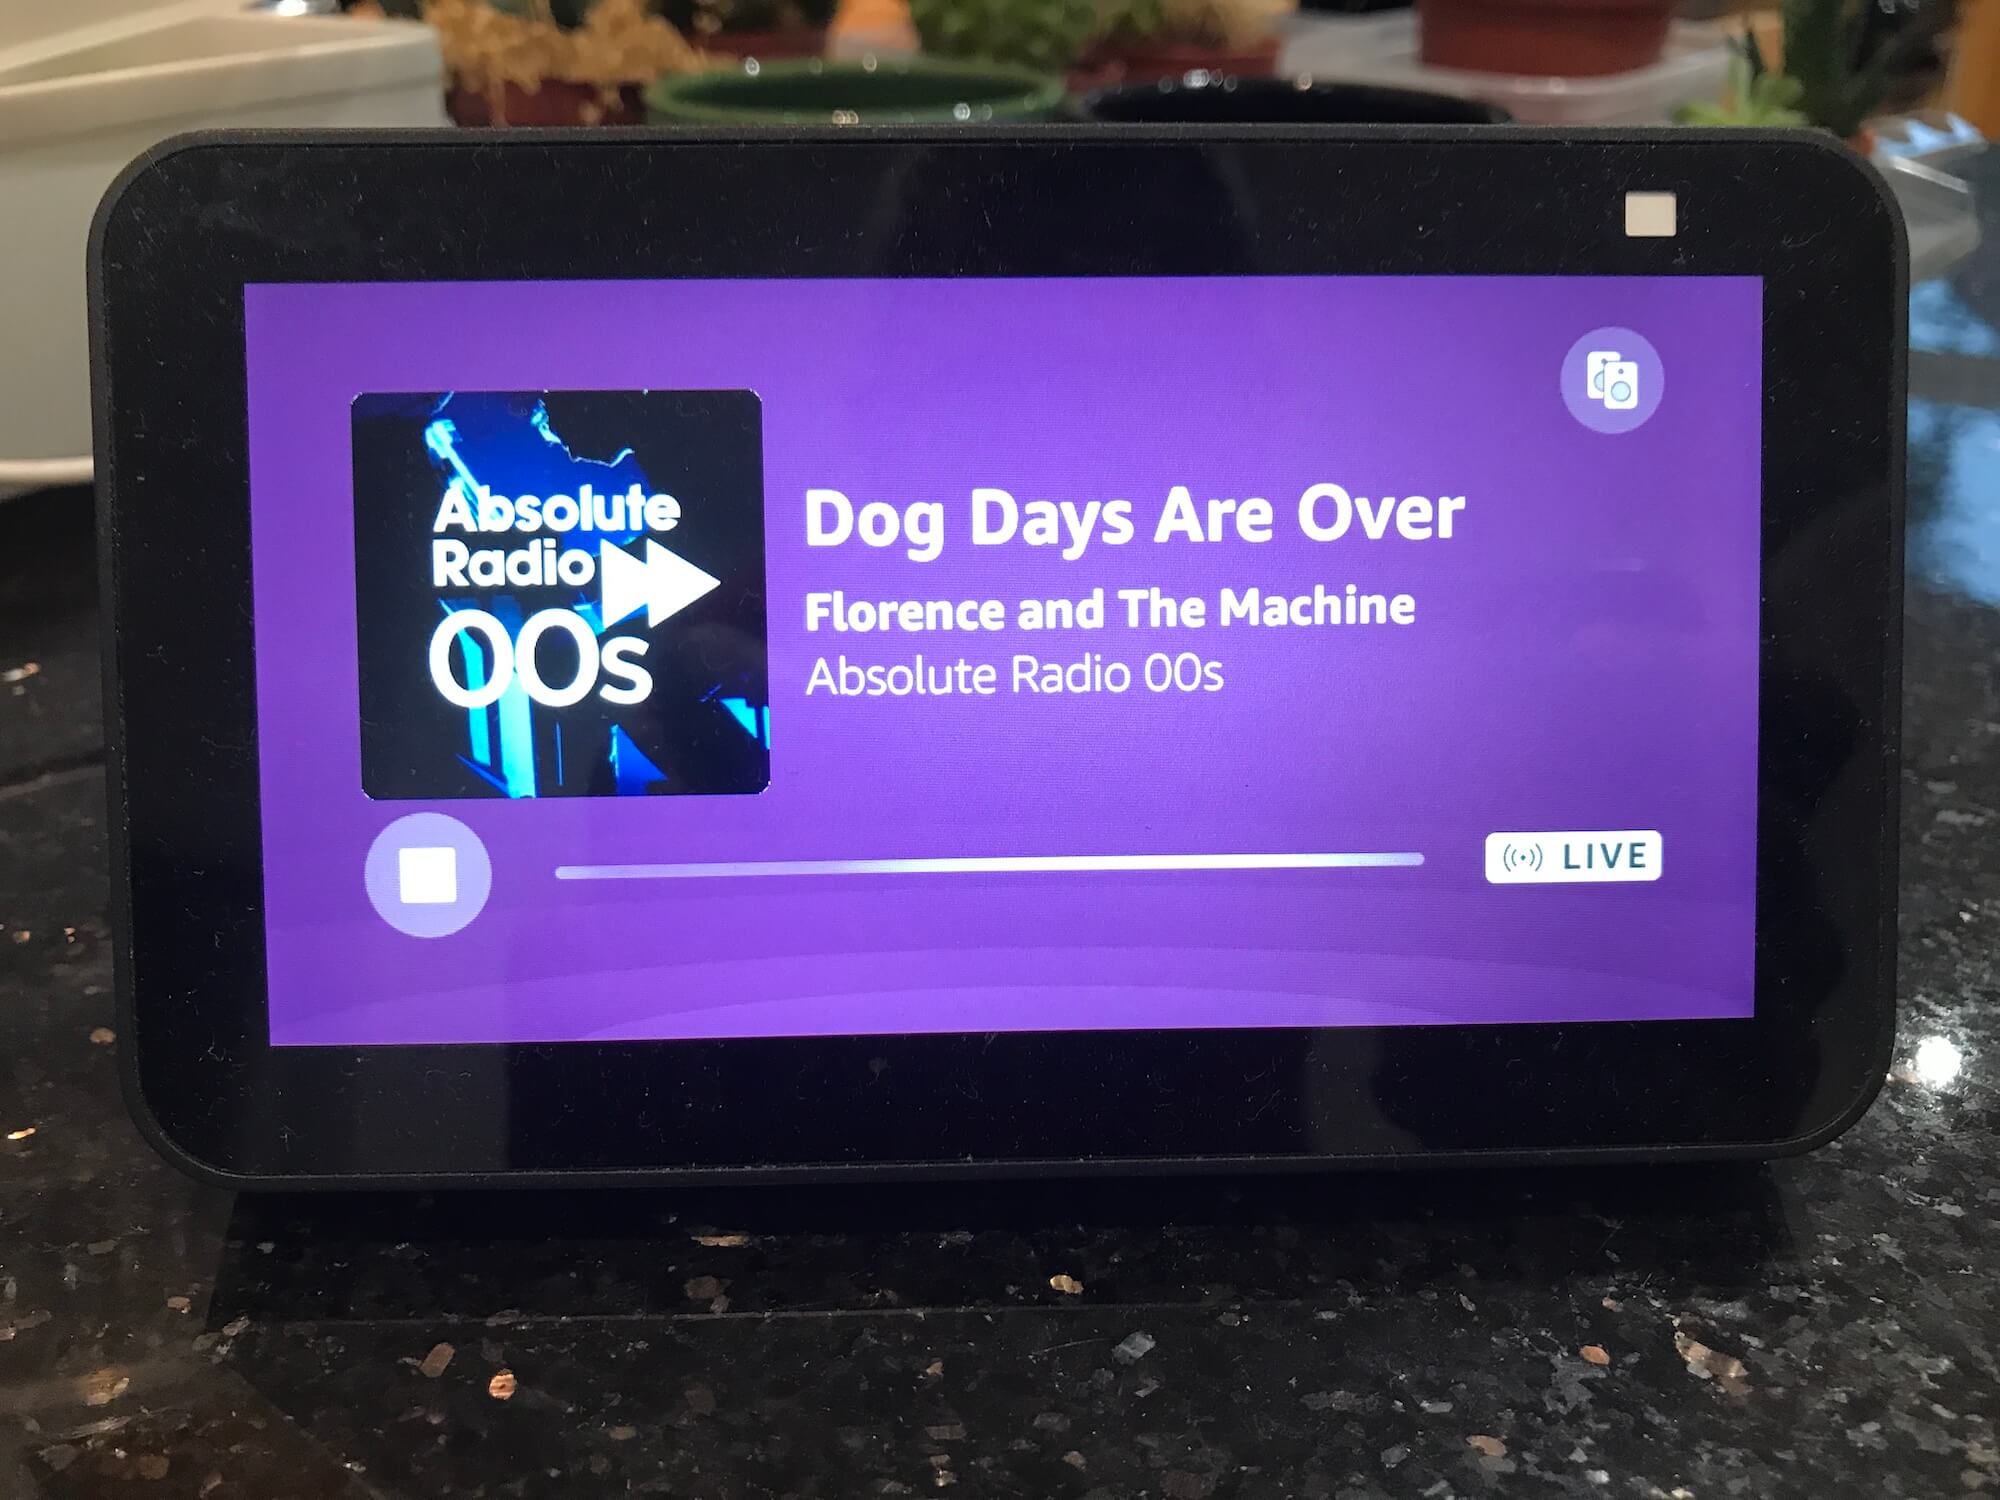 Absolute Radio 00's manages to show what's playing just fine!